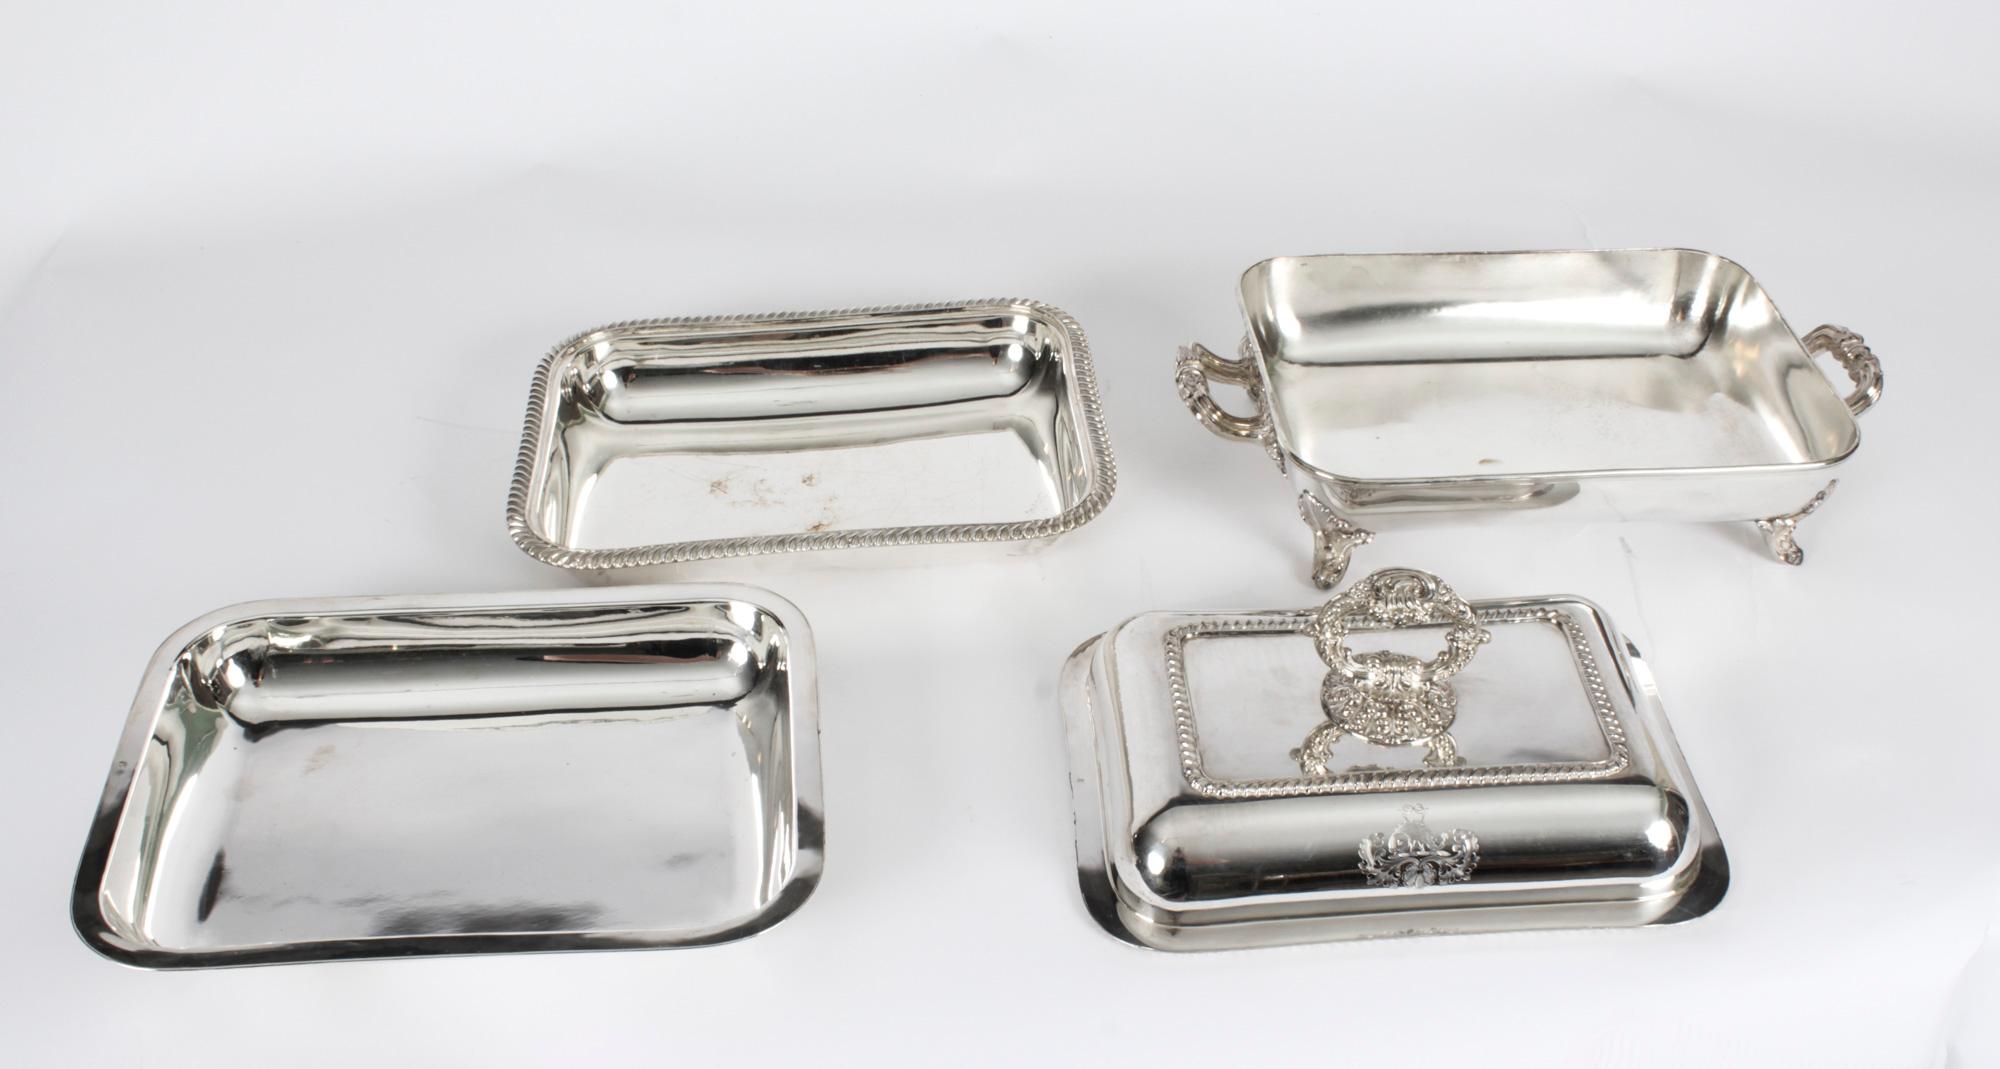 Antique Pair of English Silver Plated Entrée Dishes, Mid-19th Century 10